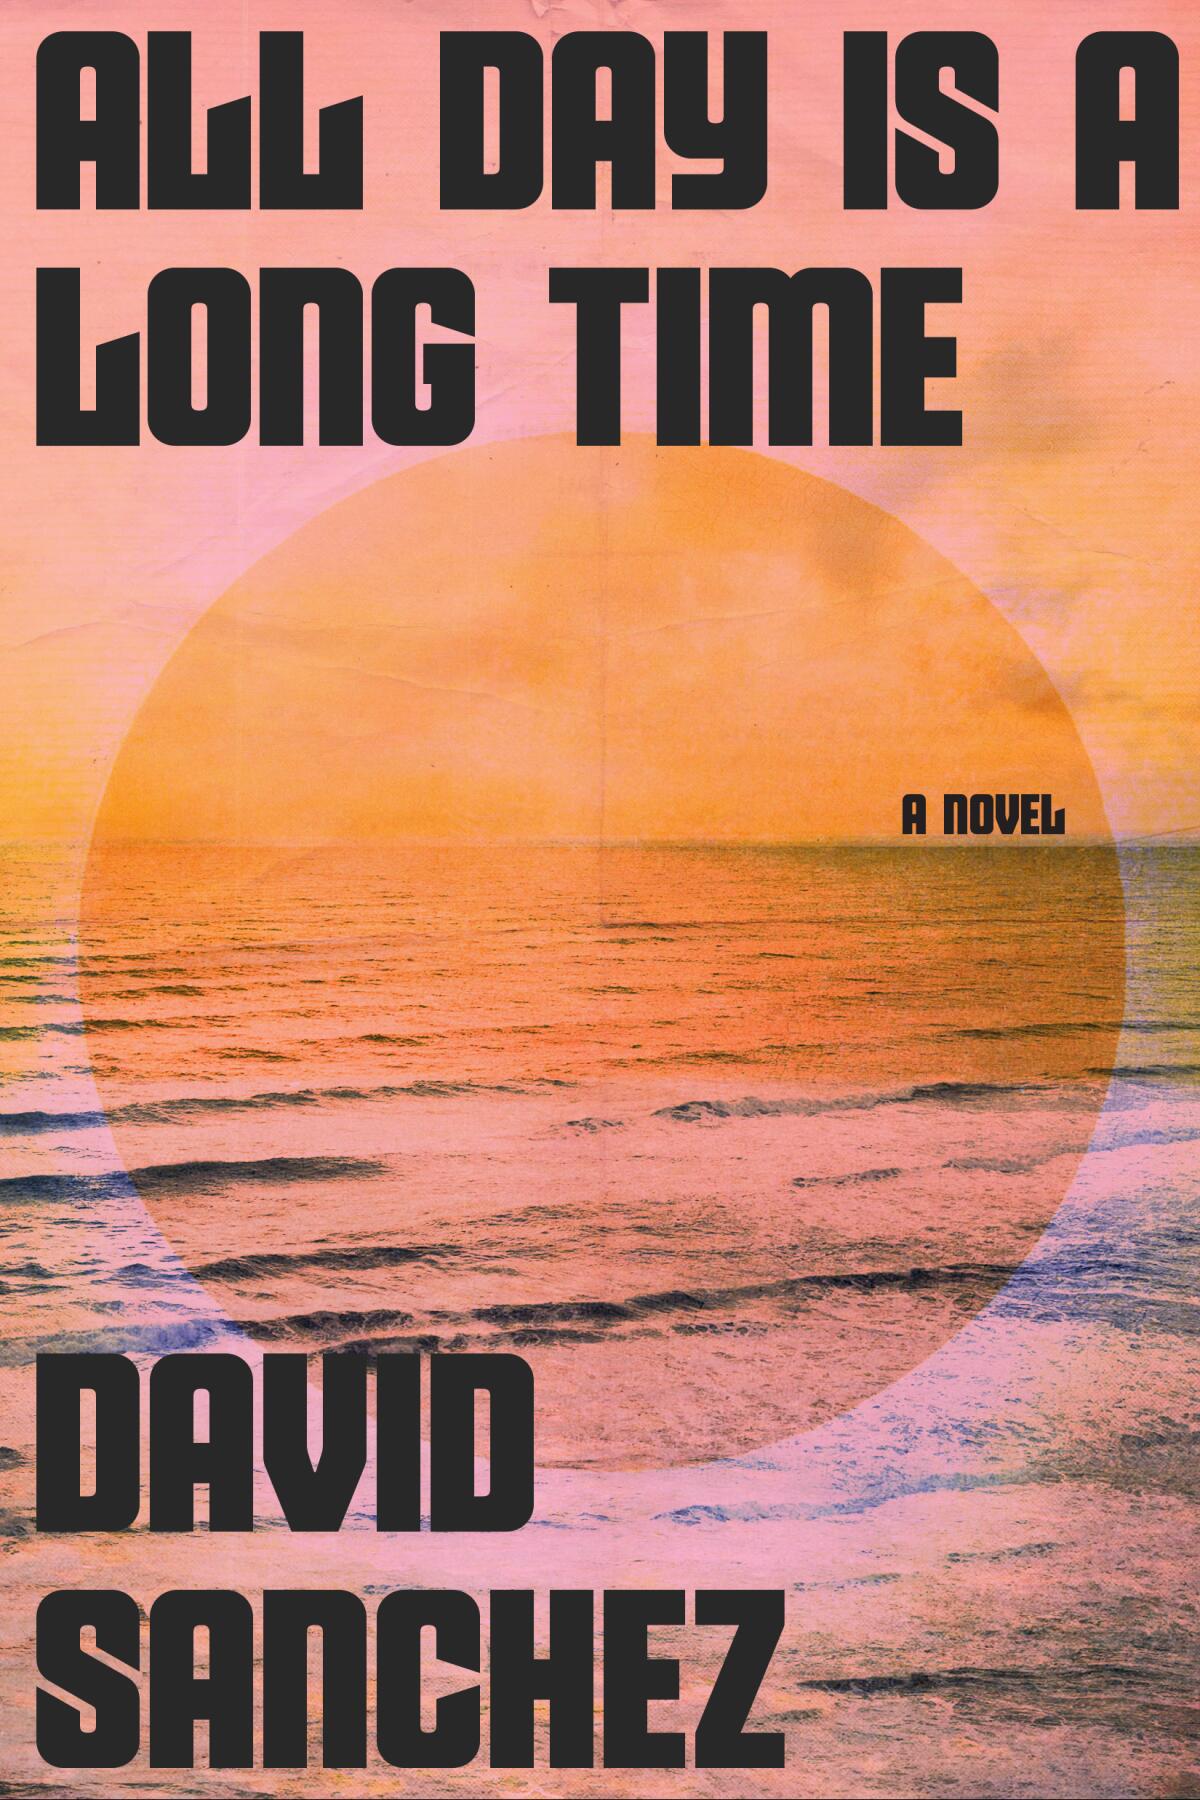 The cover of "All Day is a Long Time," by David Sanchez